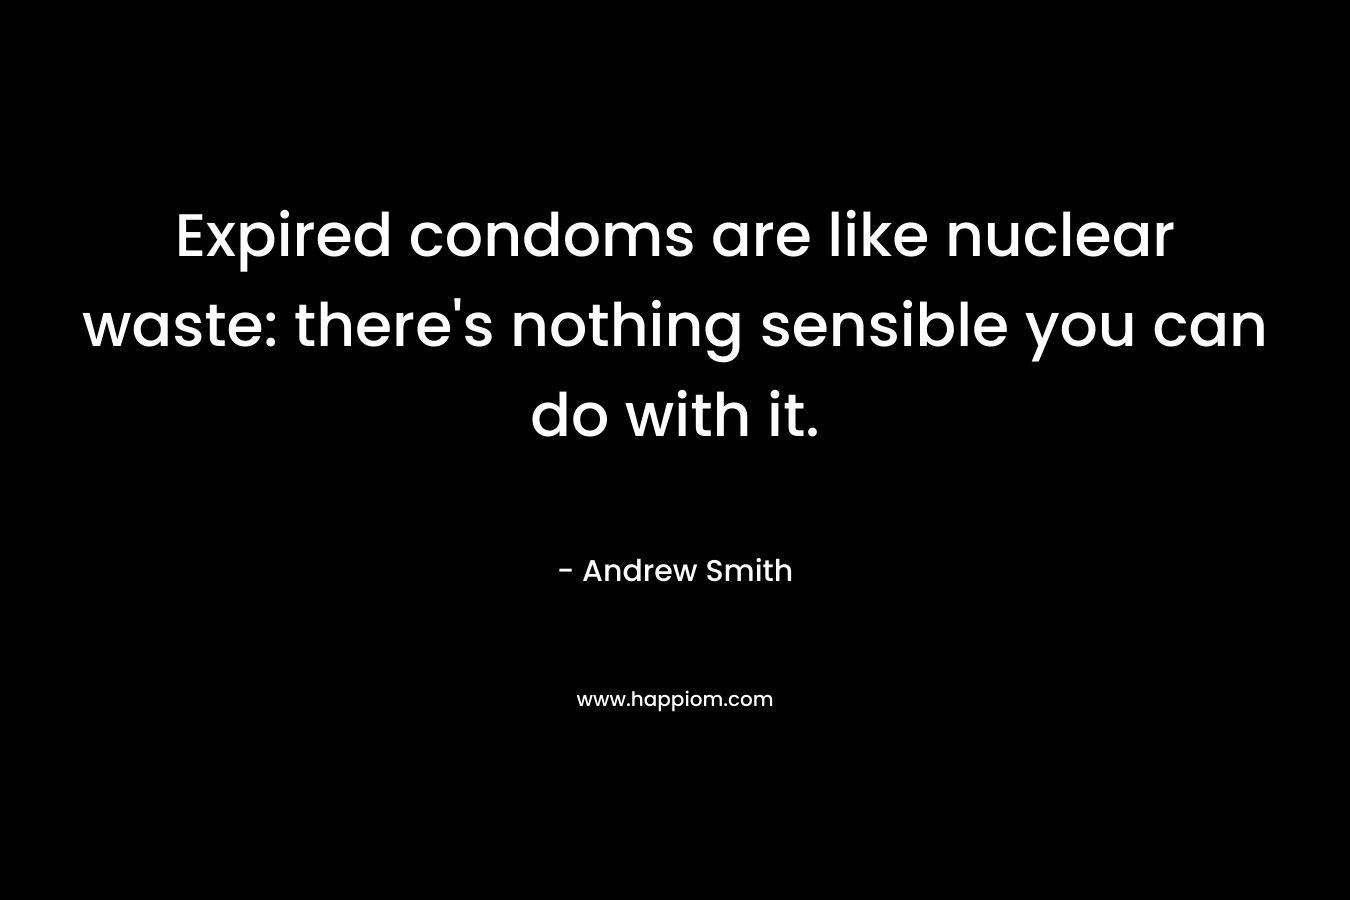 Expired condoms are like nuclear waste: there’s nothing sensible you can do with it. – Andrew Smith